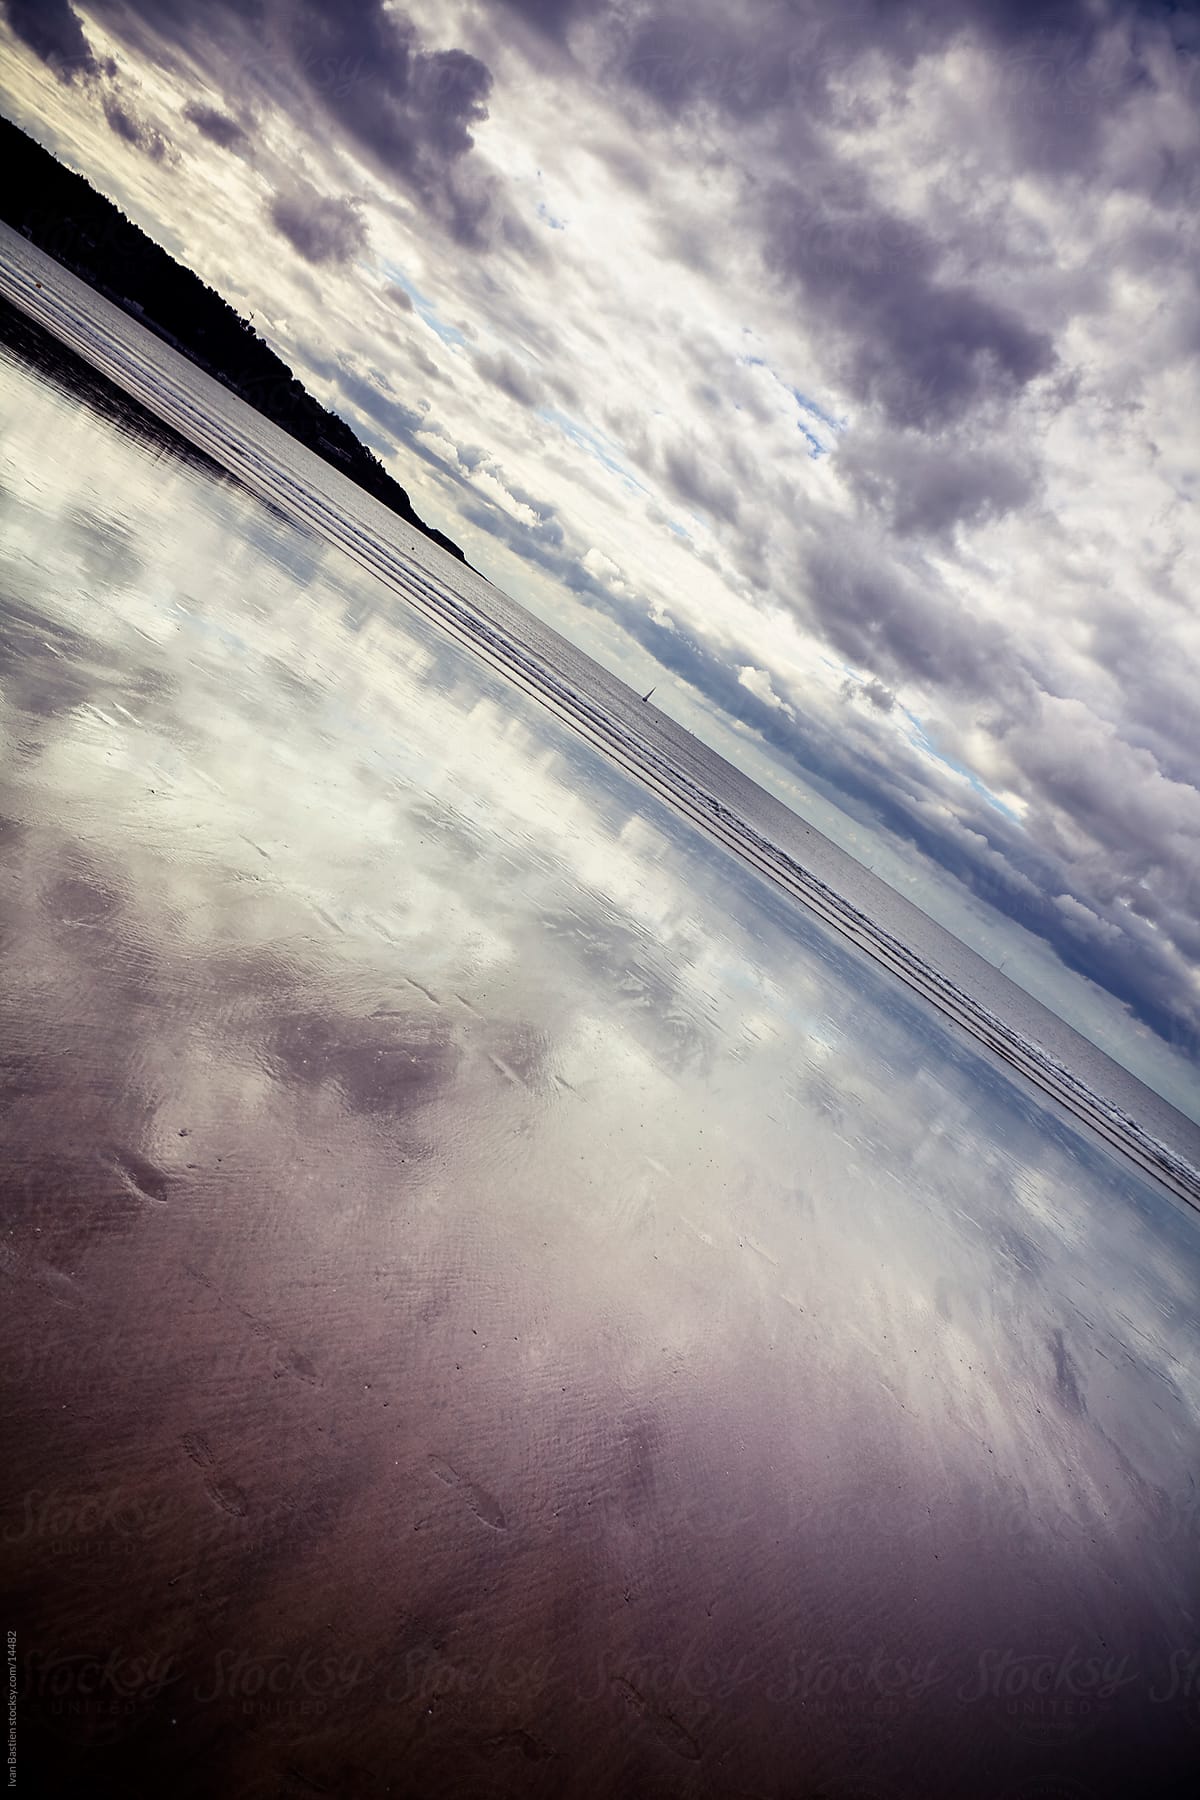 Reflection of the cloudy sky in a beach at low tide